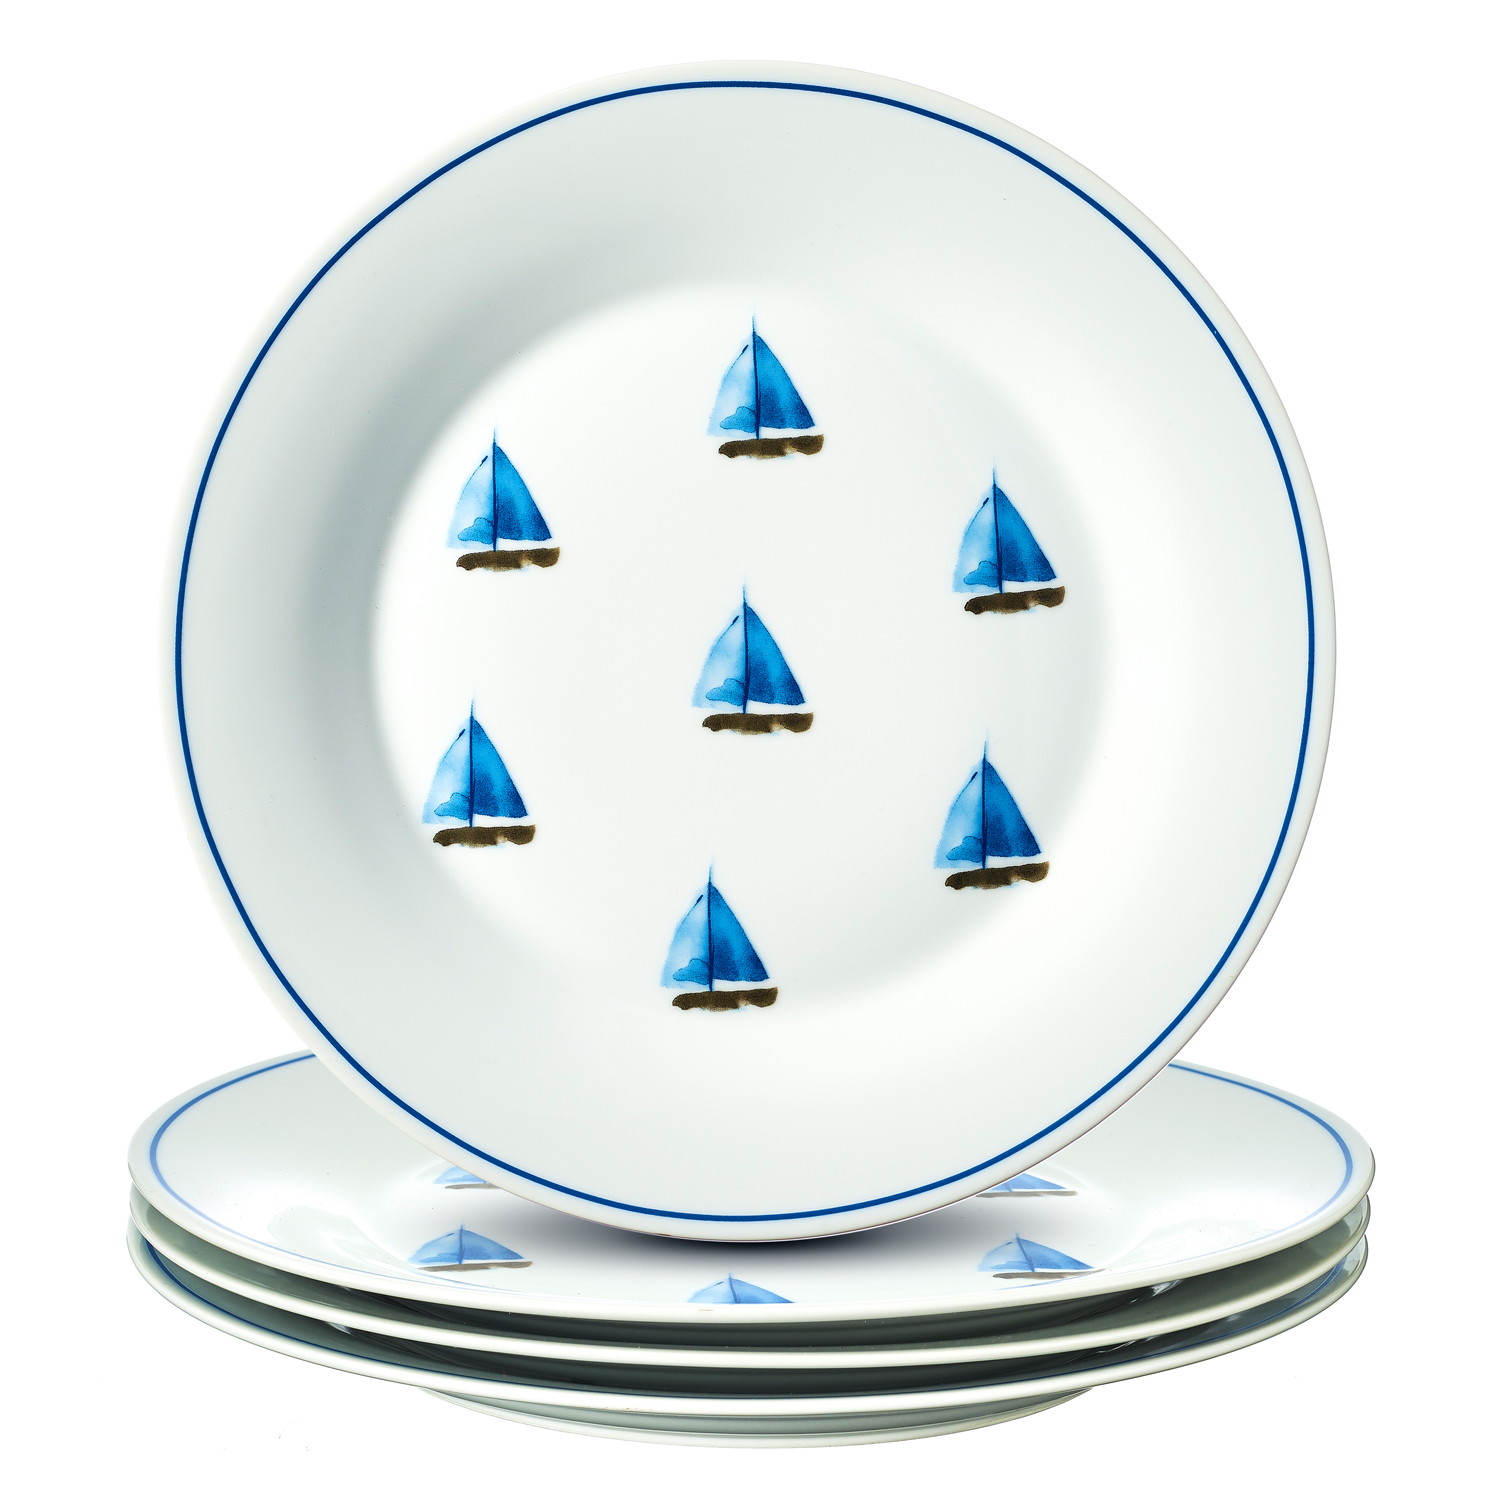 Sail Boat Watercolor Collection 10.5" Porcelain Set of 4 Dinner Plates, Walmart Exclusive - image 2 of 3